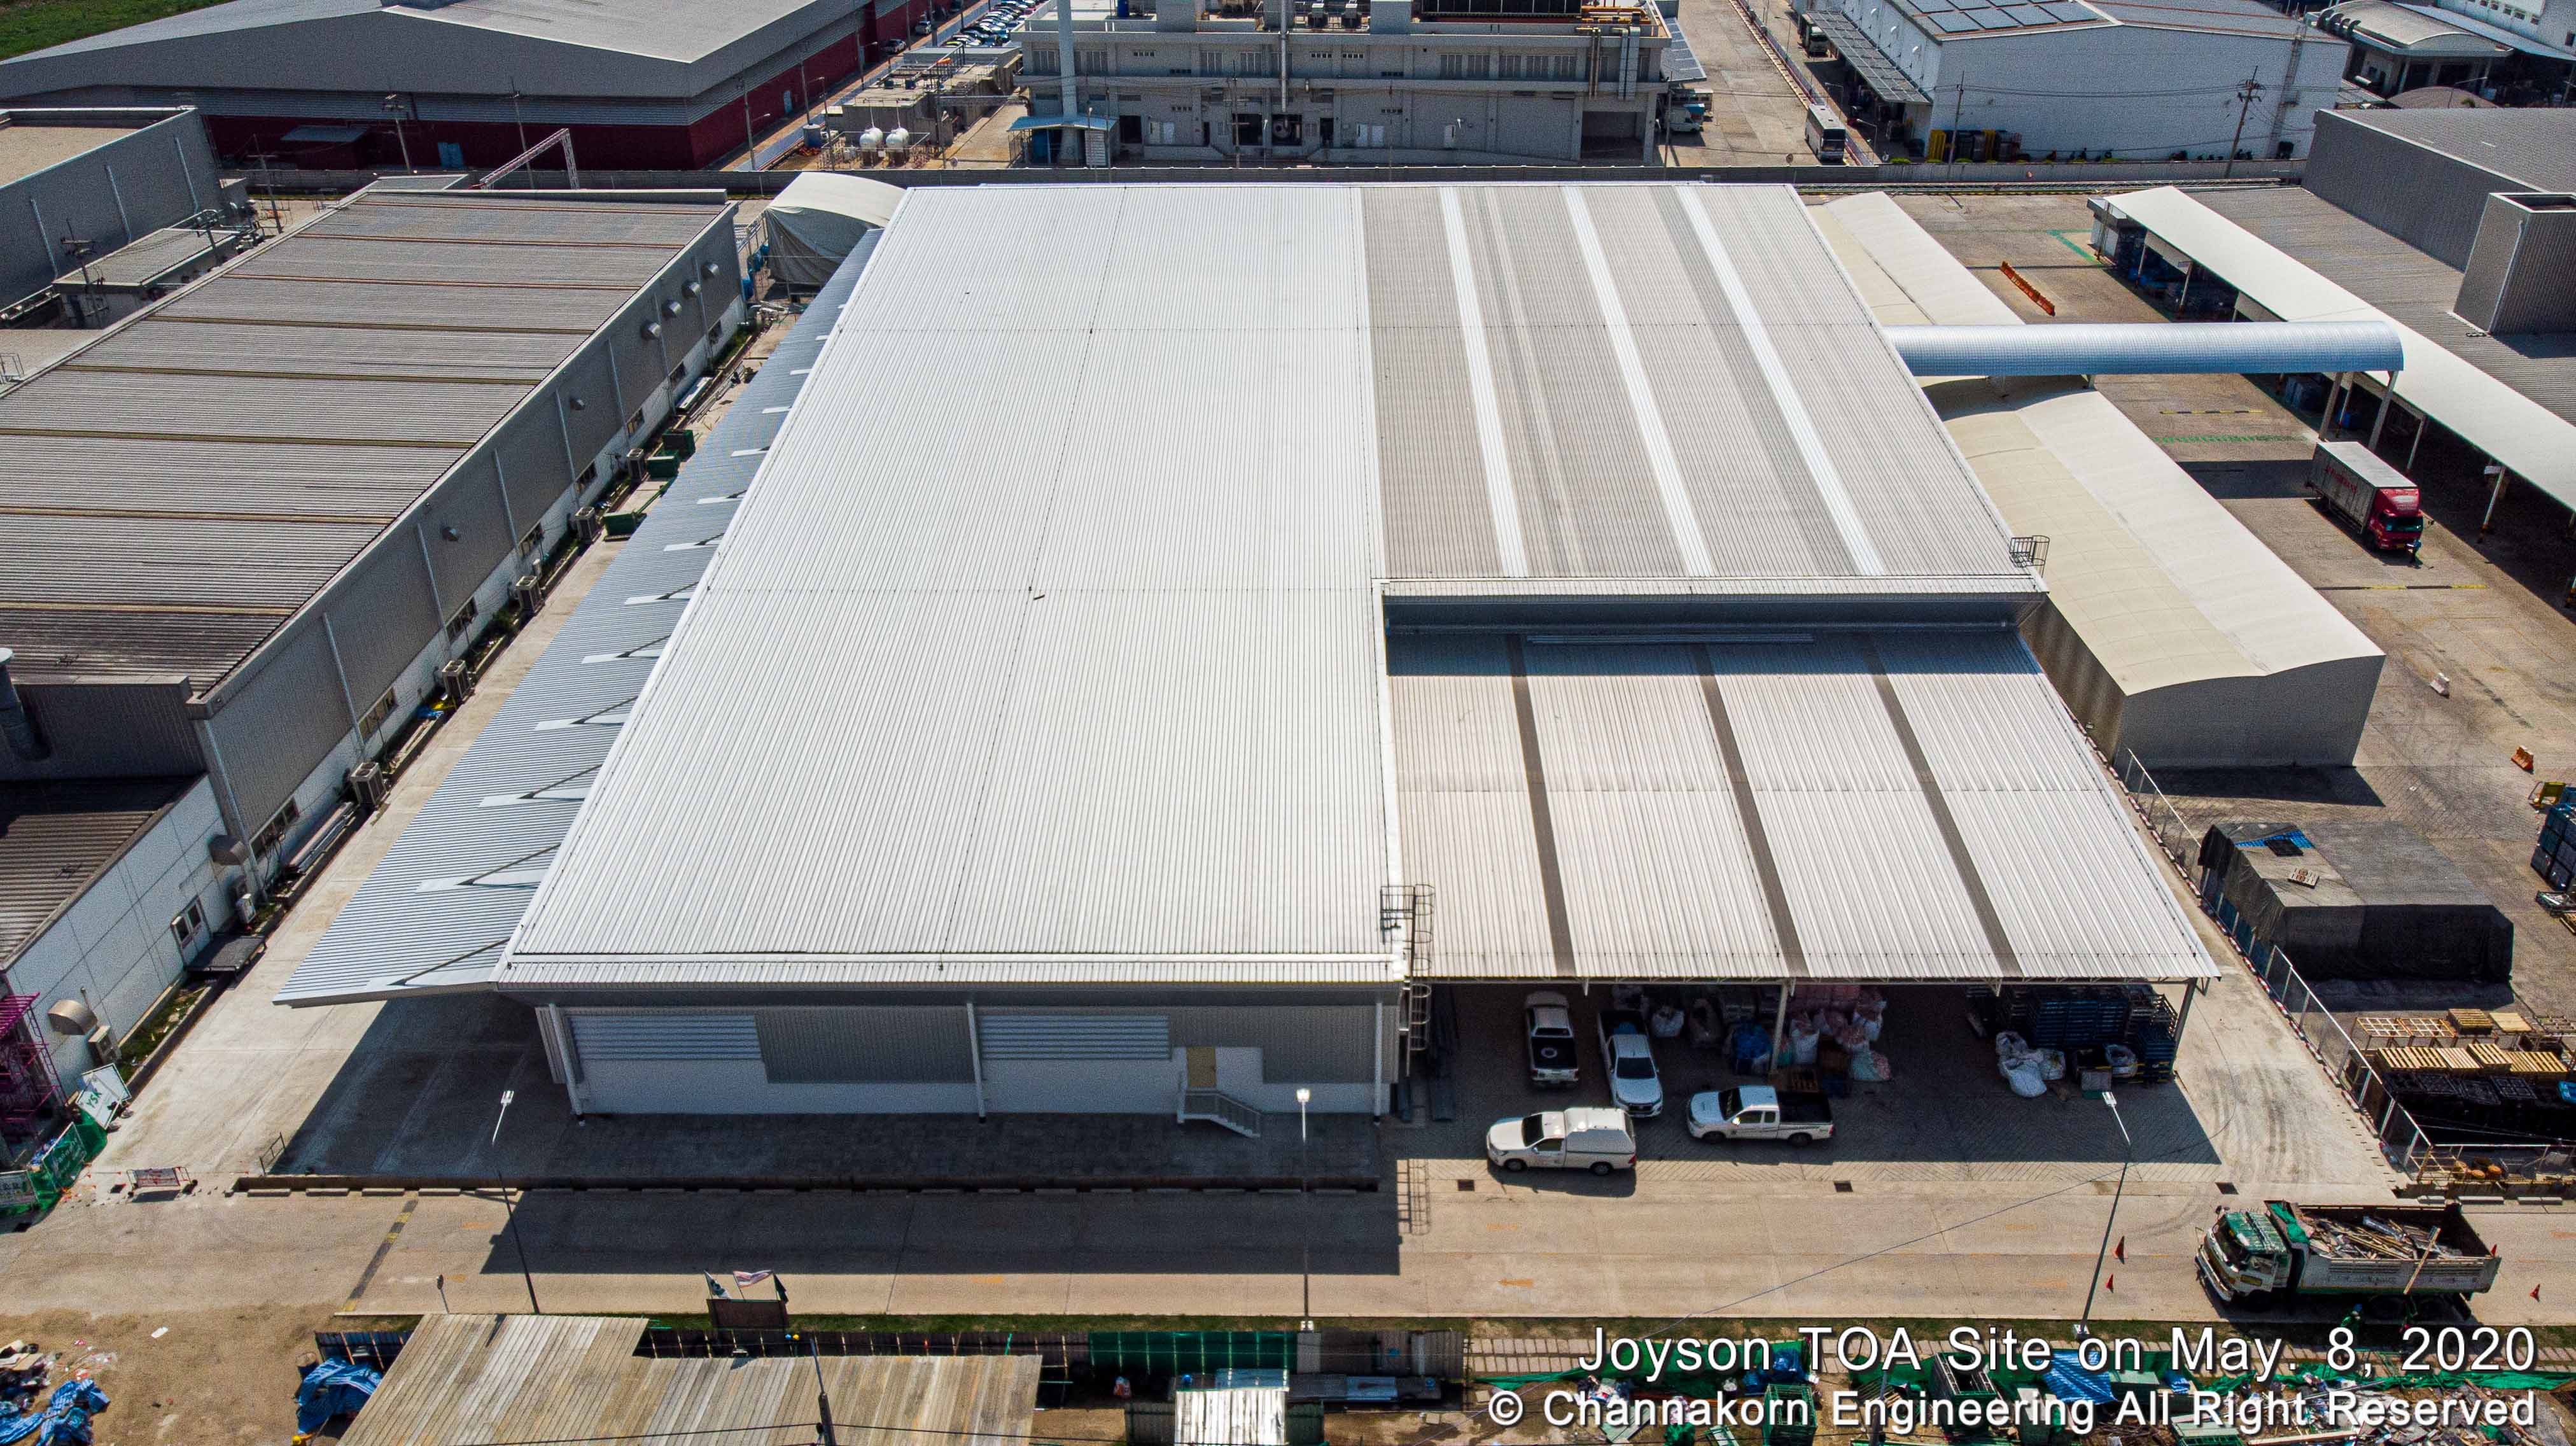 Construction of a new Warehouse of Joyson-Toa Safety Systems Co.,Ltd - Channakorn Engineering Co.,Ltd.